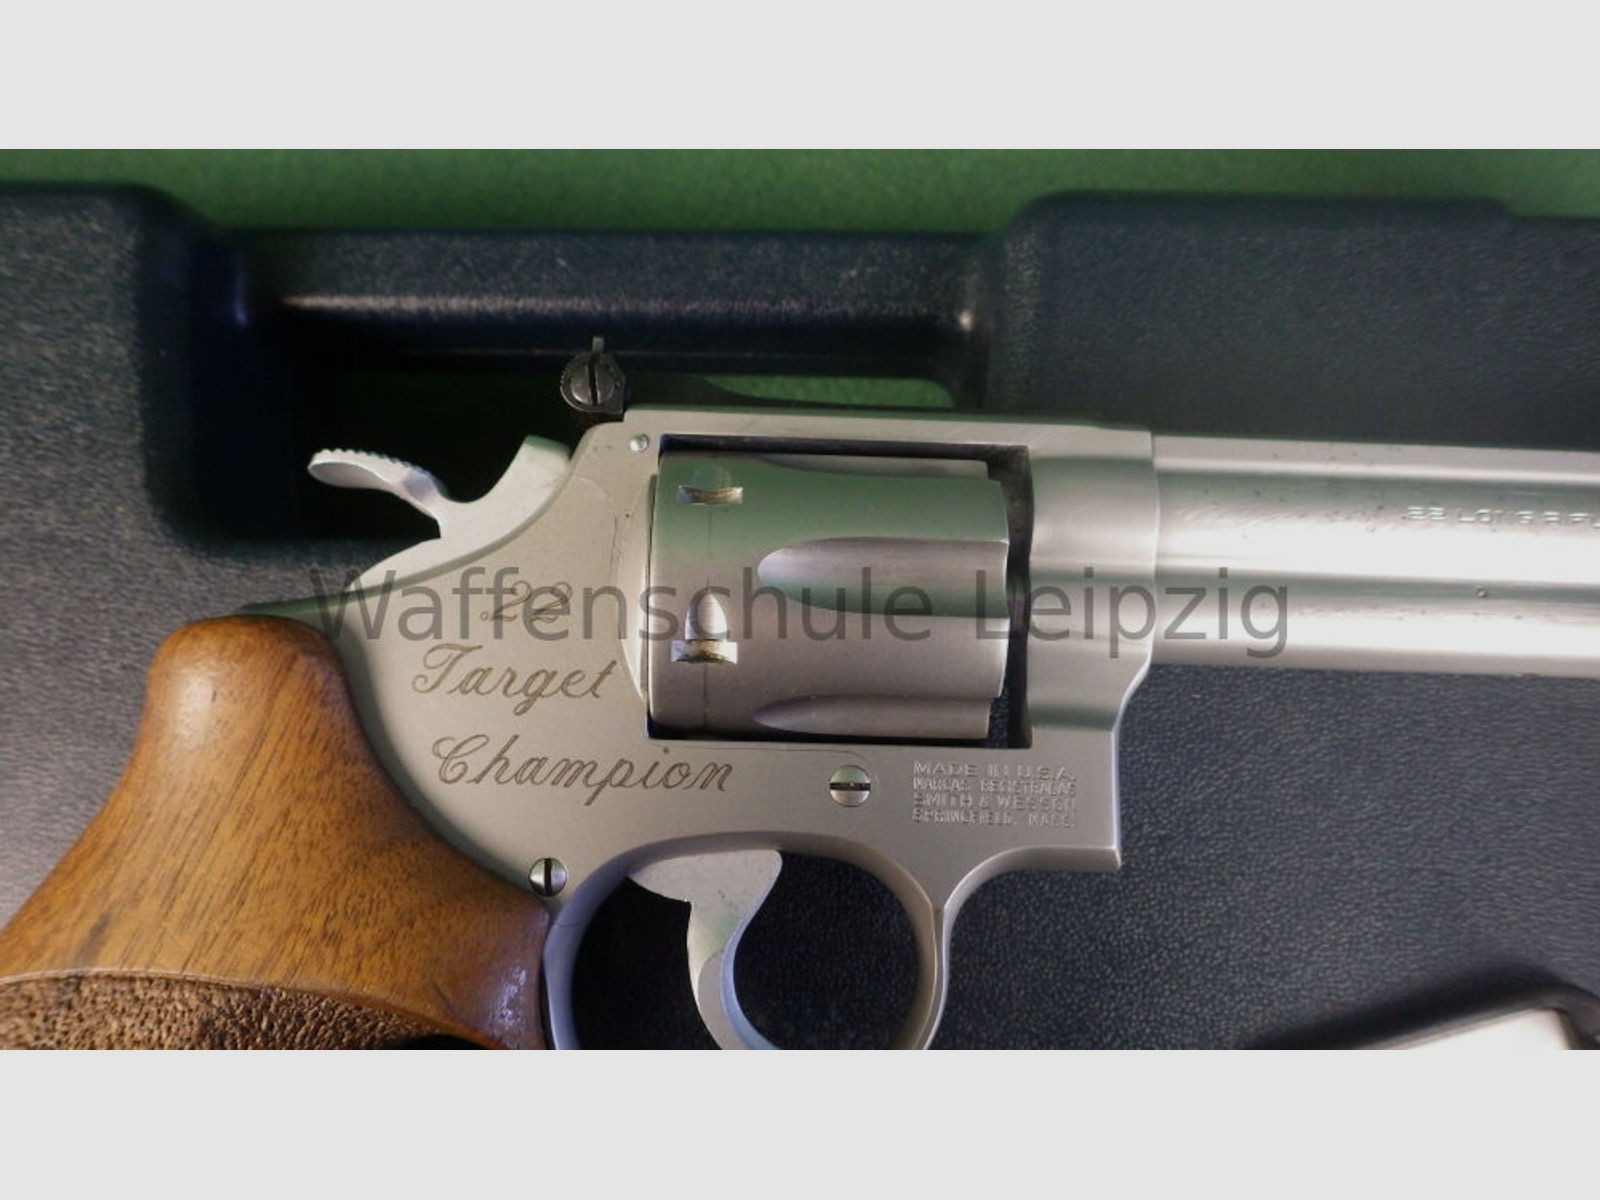 Smith & Wesson	 617 Target Champion